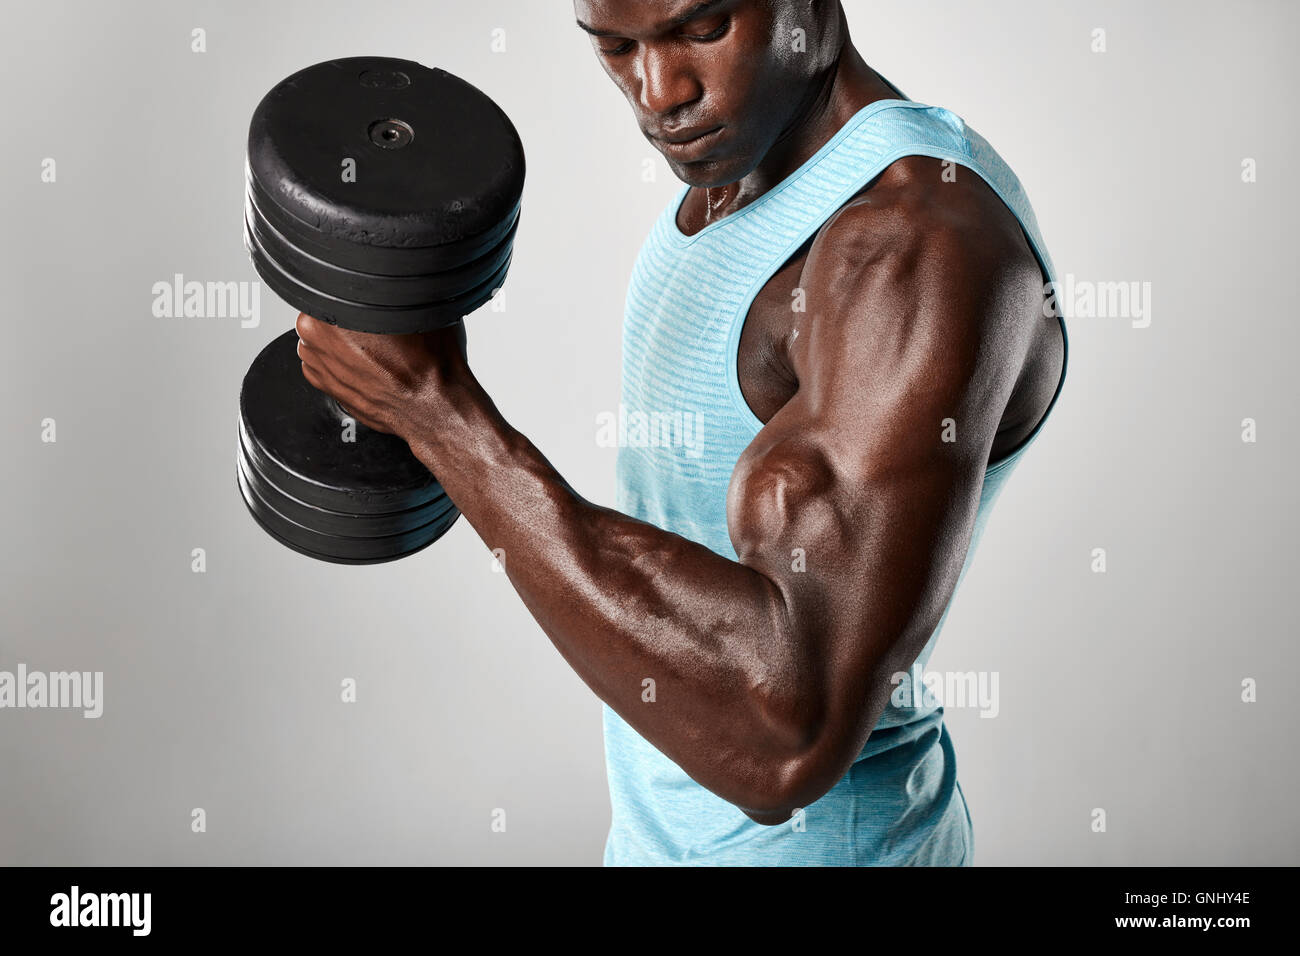 Shot of fit young man doing biceps curl with dumbbell against grey background. African fitness model exercising with heavy dumbb Stock Photo